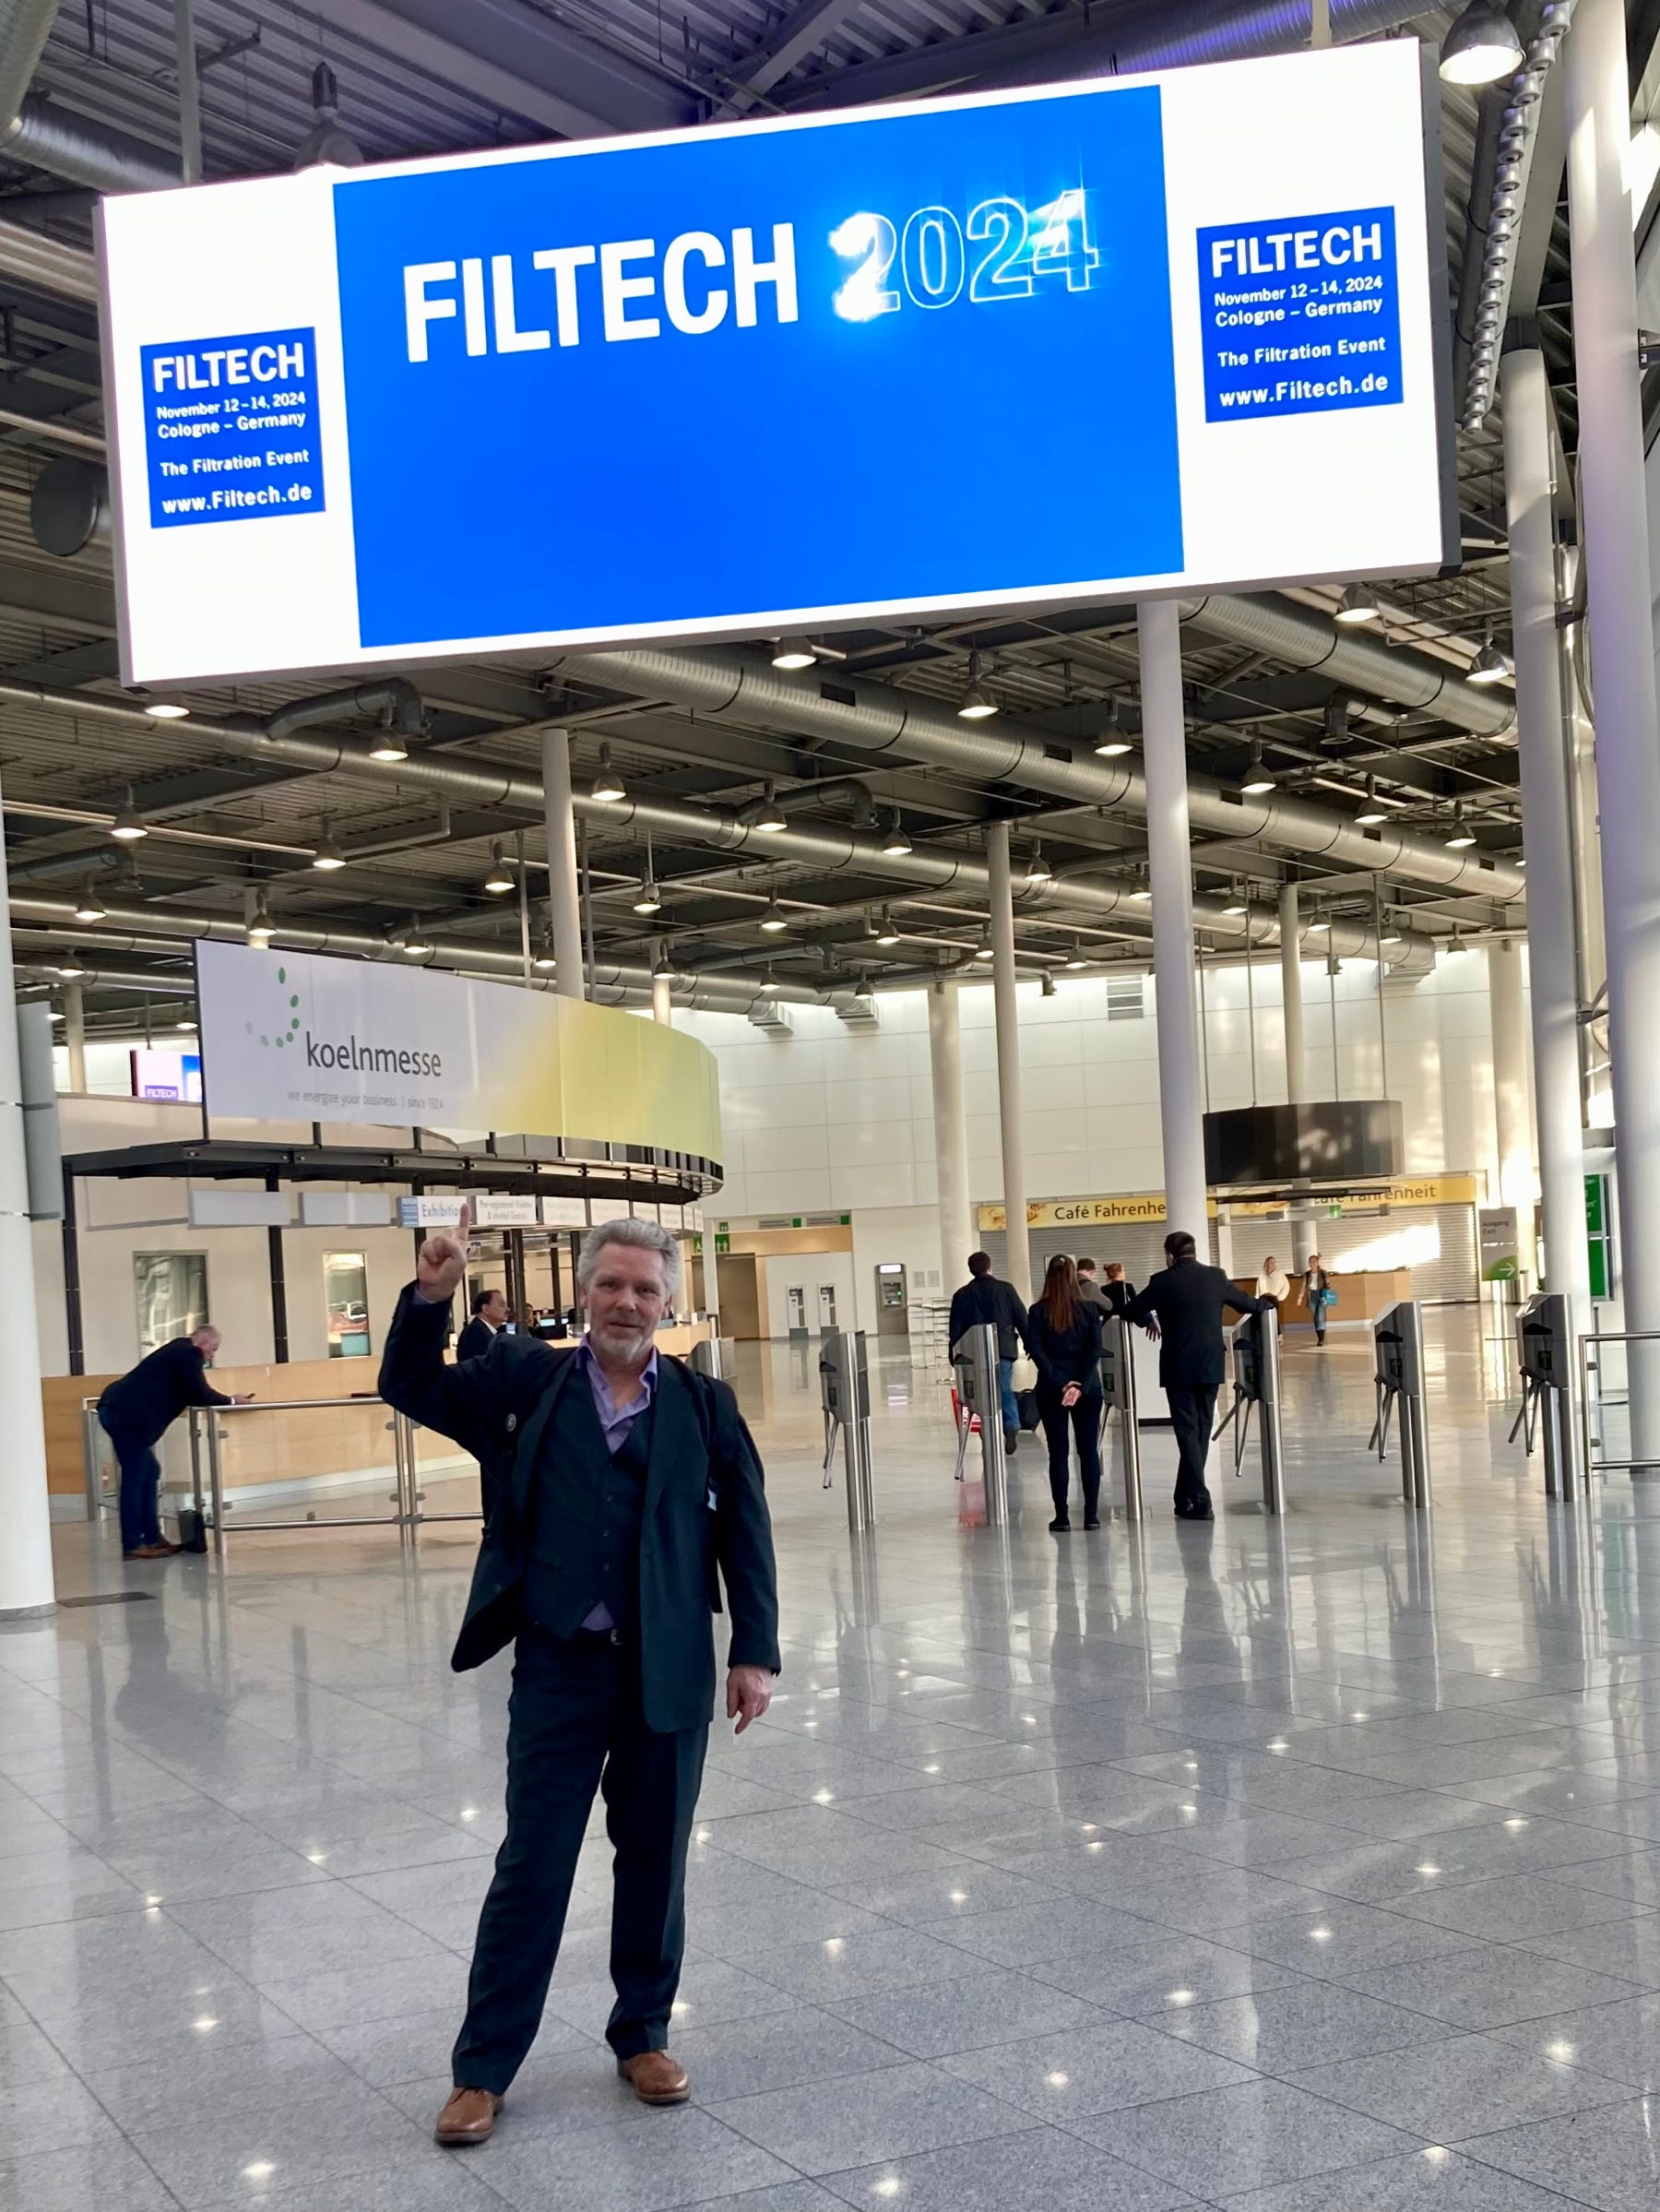 Stephan Schütze is looking forward to seeing you at the #Filtech 2024